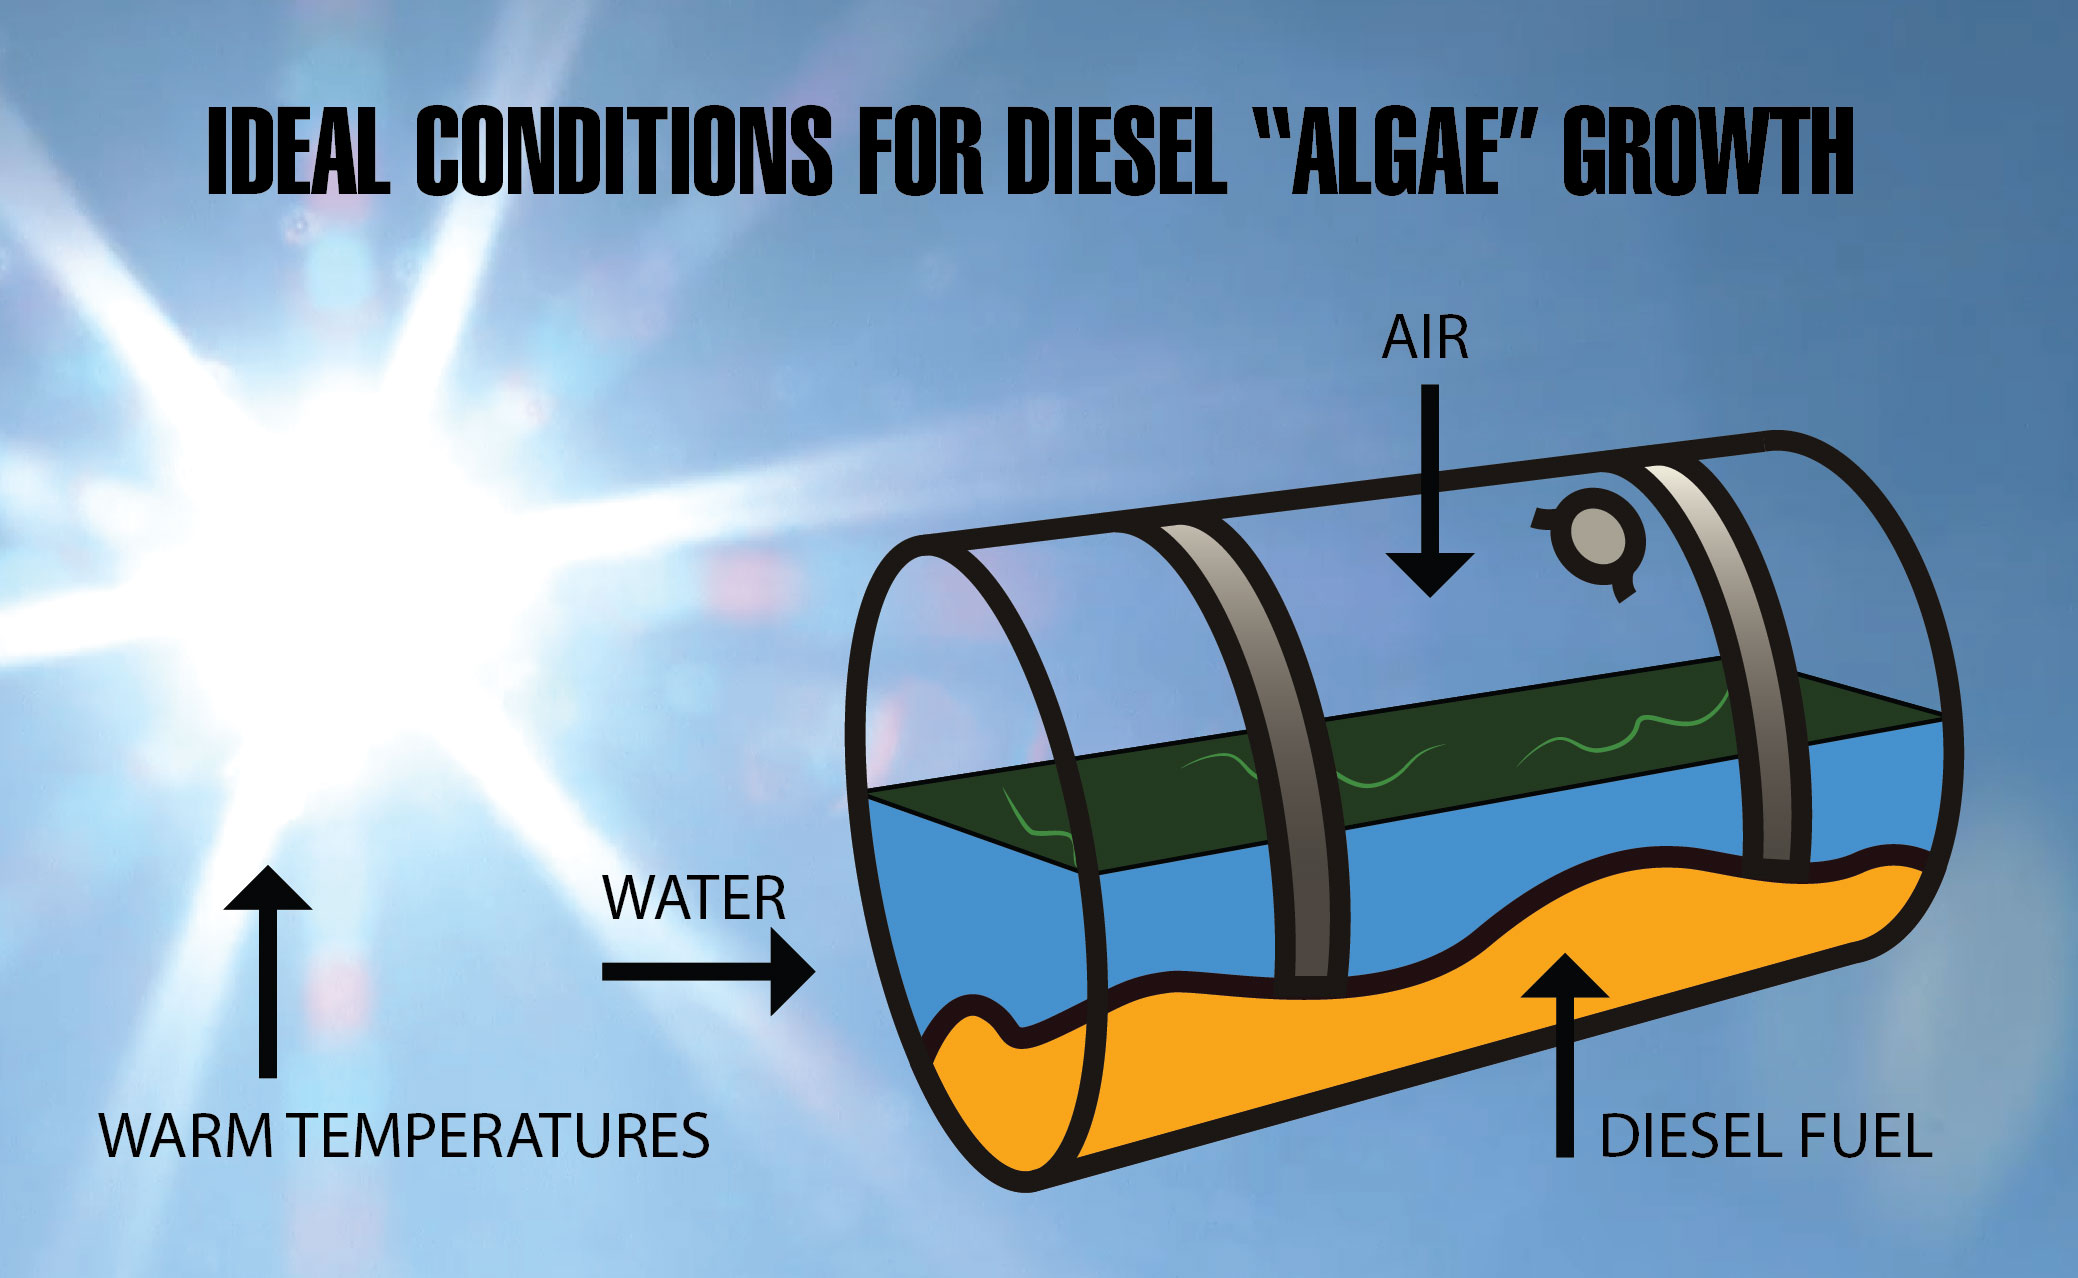 Chart displaying ideal conditions for diesel algae: warm temperatures, water, and air